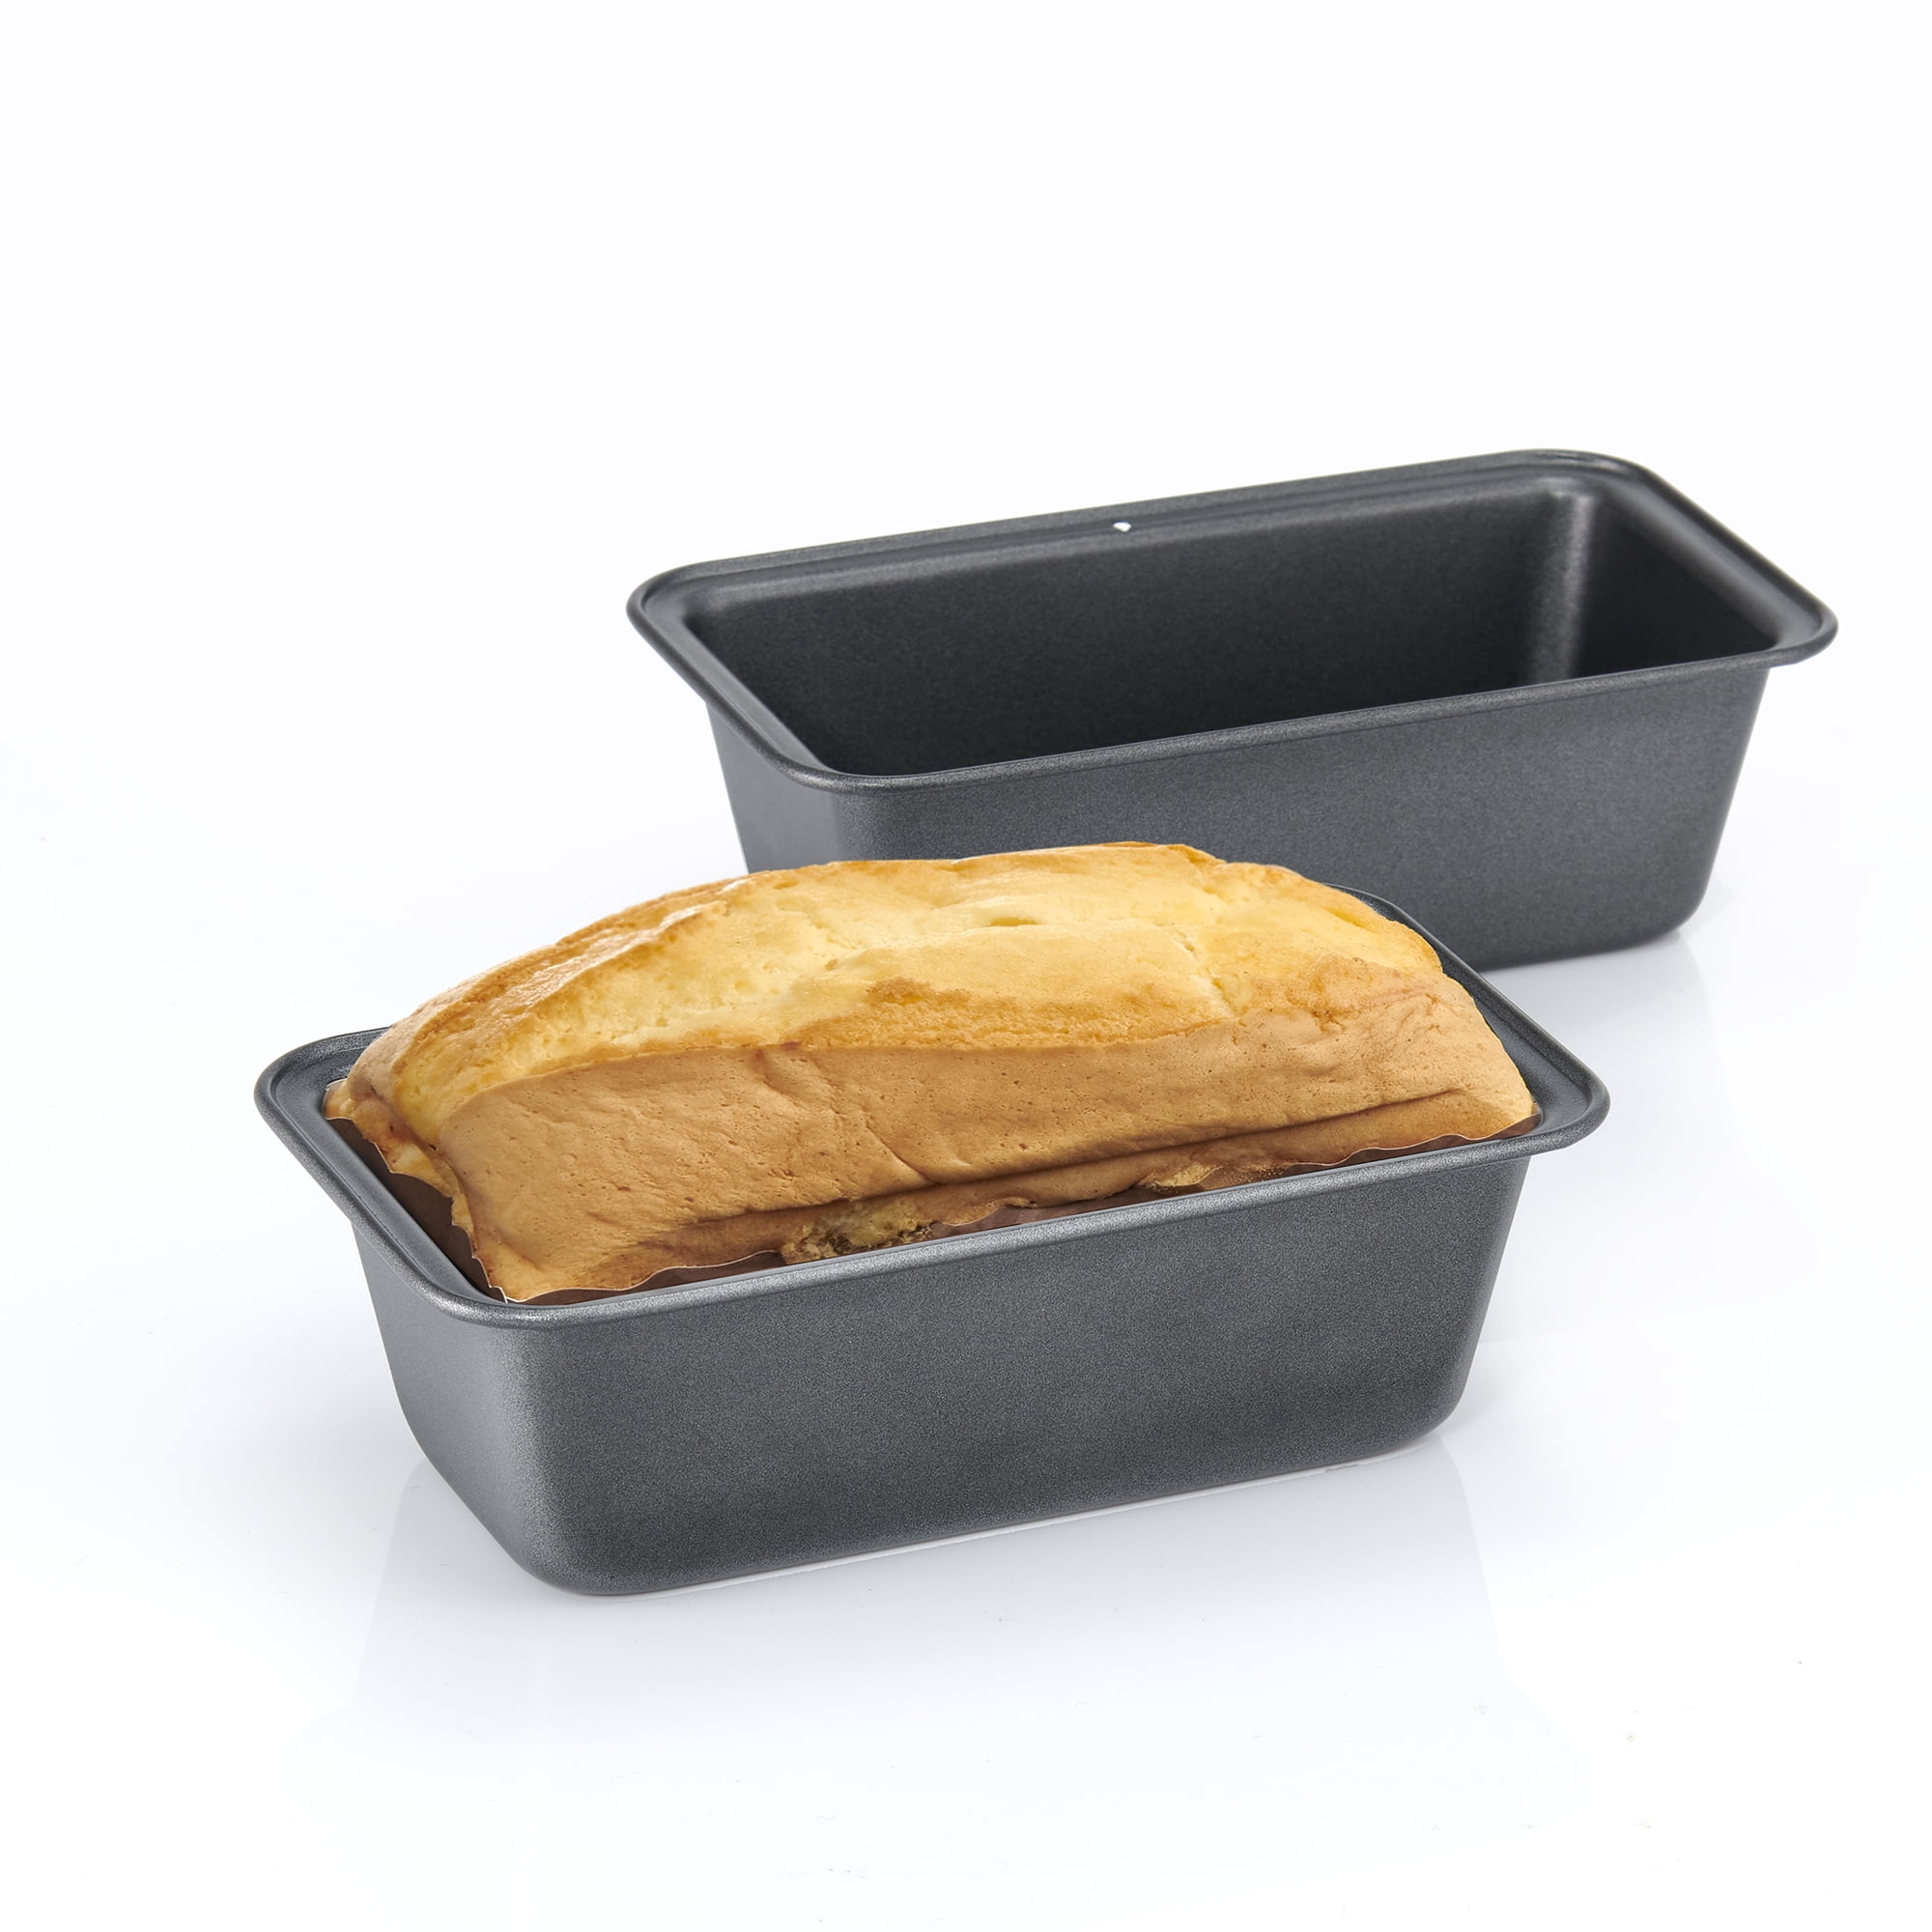 HONGBAKE Mini Loaf Pan for Baking Bread, 6 x 3.3 x 2 In Nonstick Small  Banana Bread Tins Set of 3, Tiny Carbon Steel Meatloaf Pan - Dark Grey